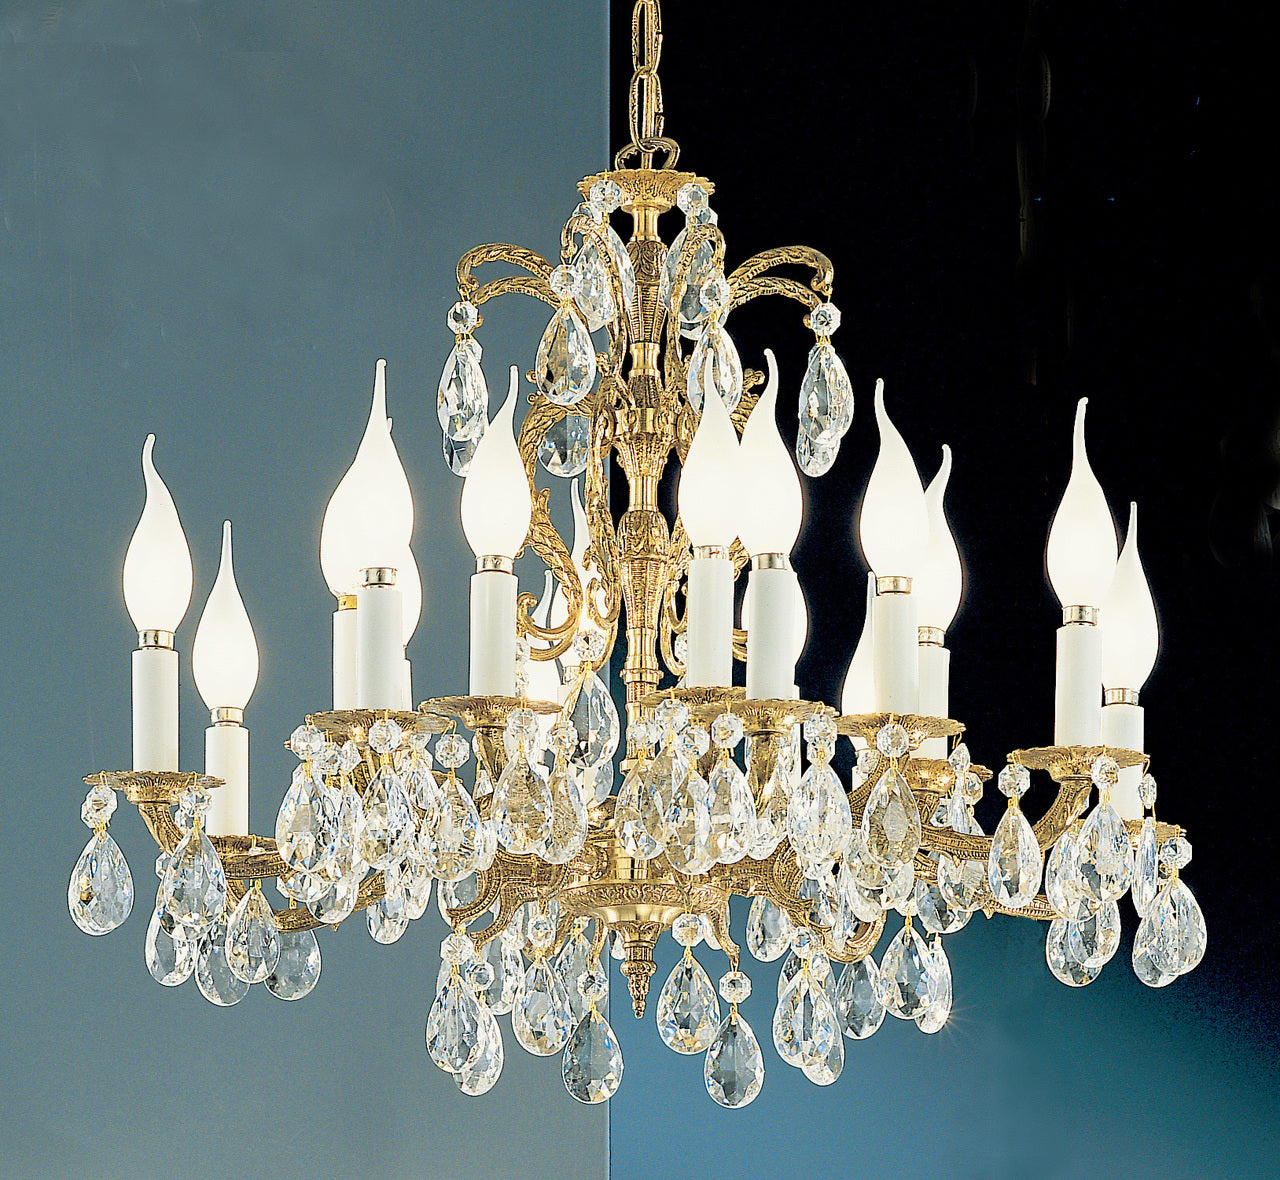 Classic Lighting 5216 OWB SC Barcelona Crystal/Cast Brass Chandelier in Olde World Bronze (Imported from Spain)